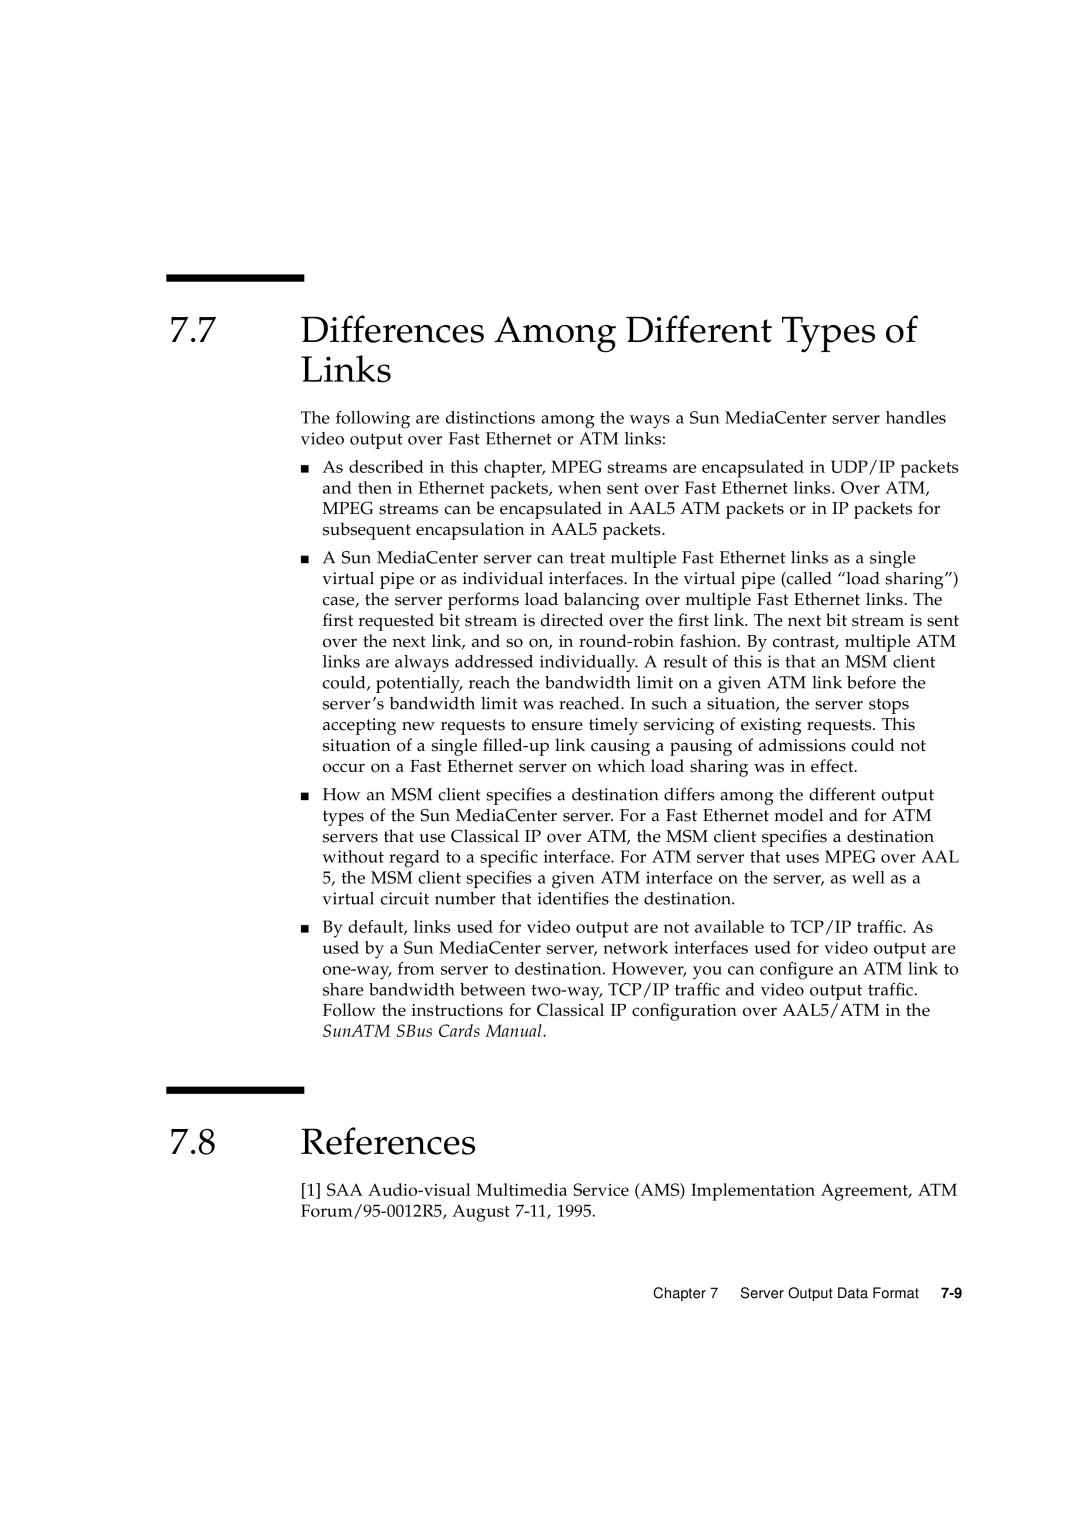 Sun Microsystems 2.1 manual Differences Among Different Types of Links, References 